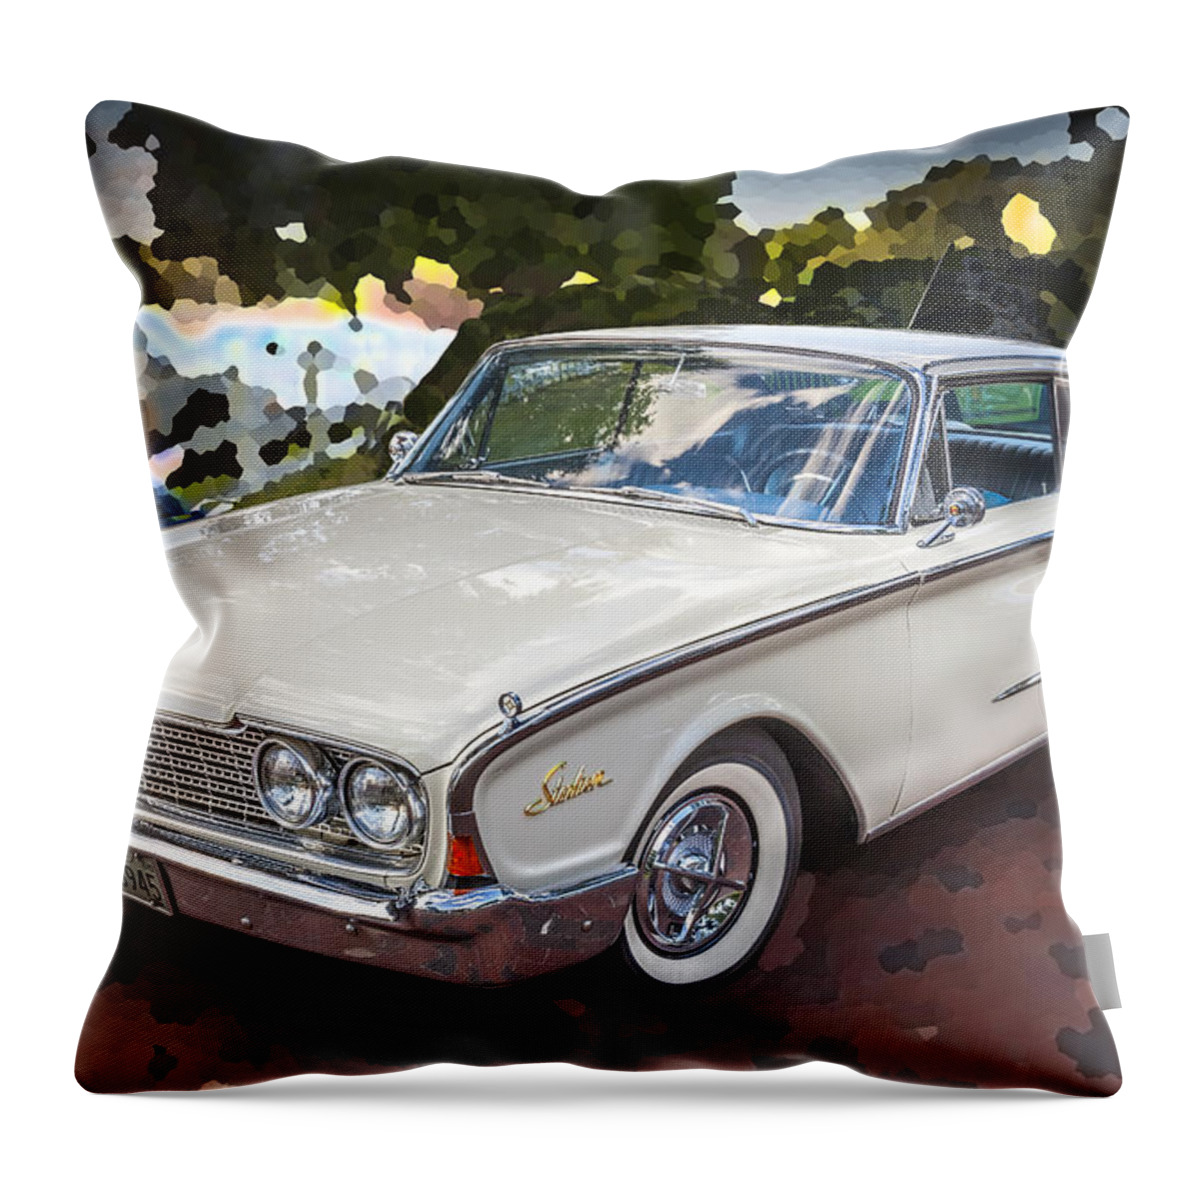 1960 Ford Starliner Throw Pillow featuring the photograph 1960 Ford Starliner by Rich Franco